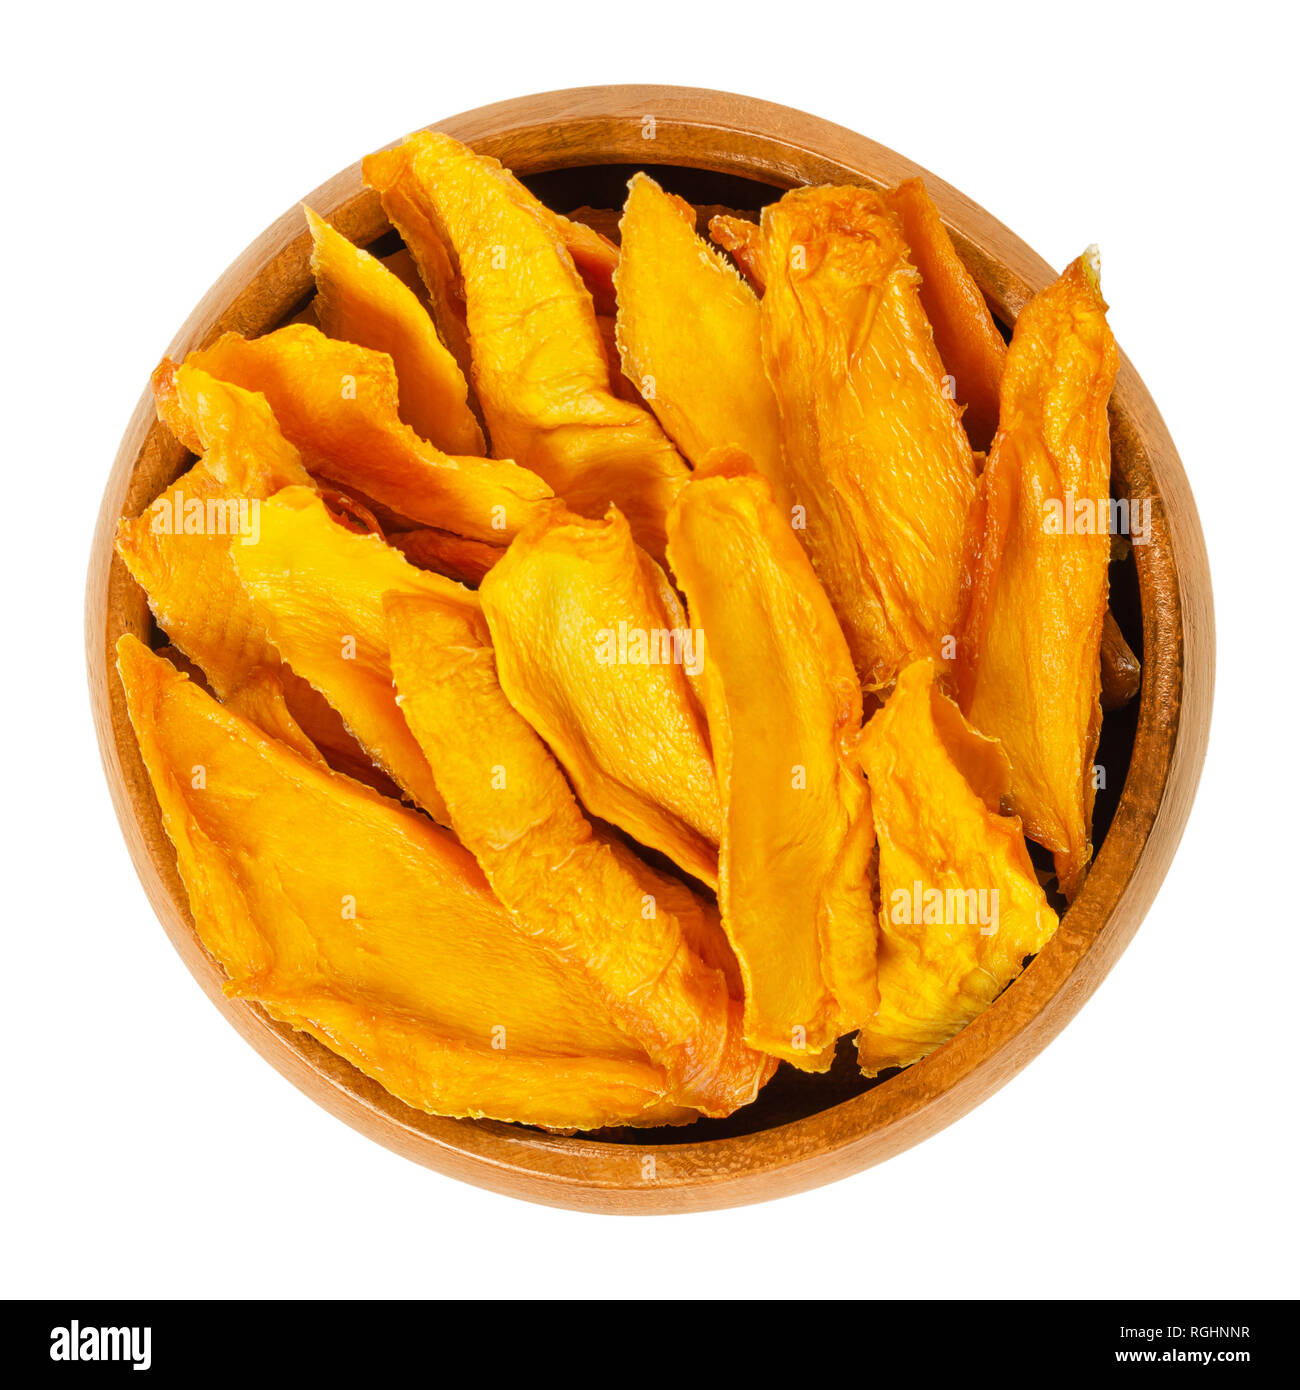 Dried mango strips in wooden bowl. Sliced, dehydrated mangoes. Juicy tropical stone fruit with yellow and orange color. Mangifera. Stock Photo